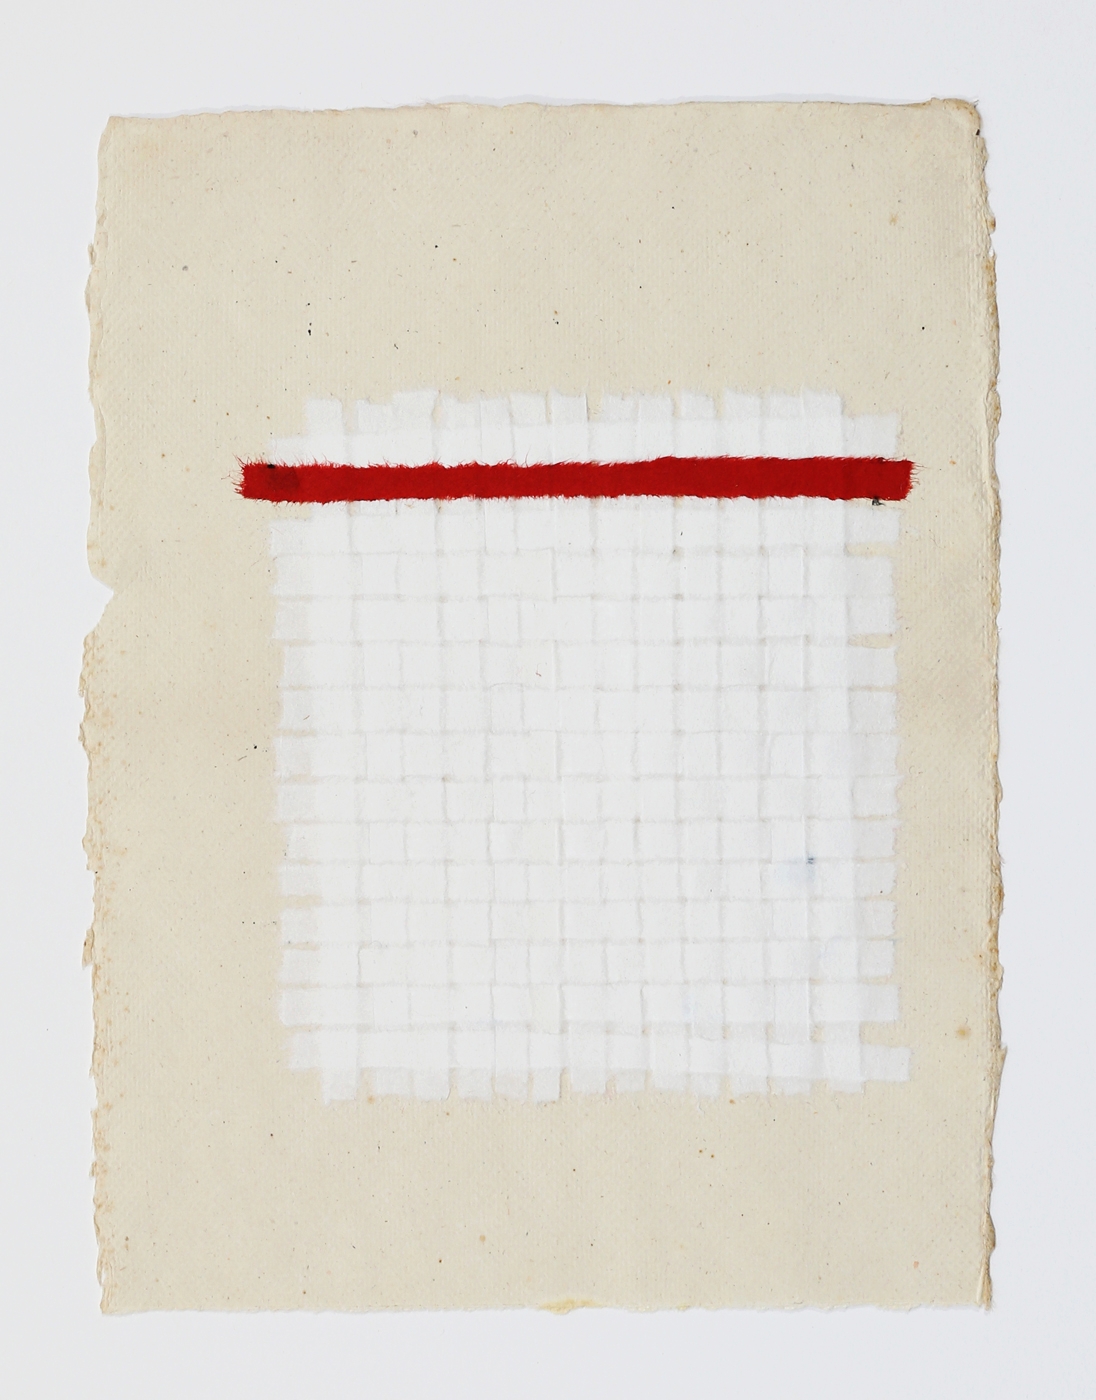  White Weaving with Red Stripe. 2015. Paper, Glue and Dye. 13" x 10" 